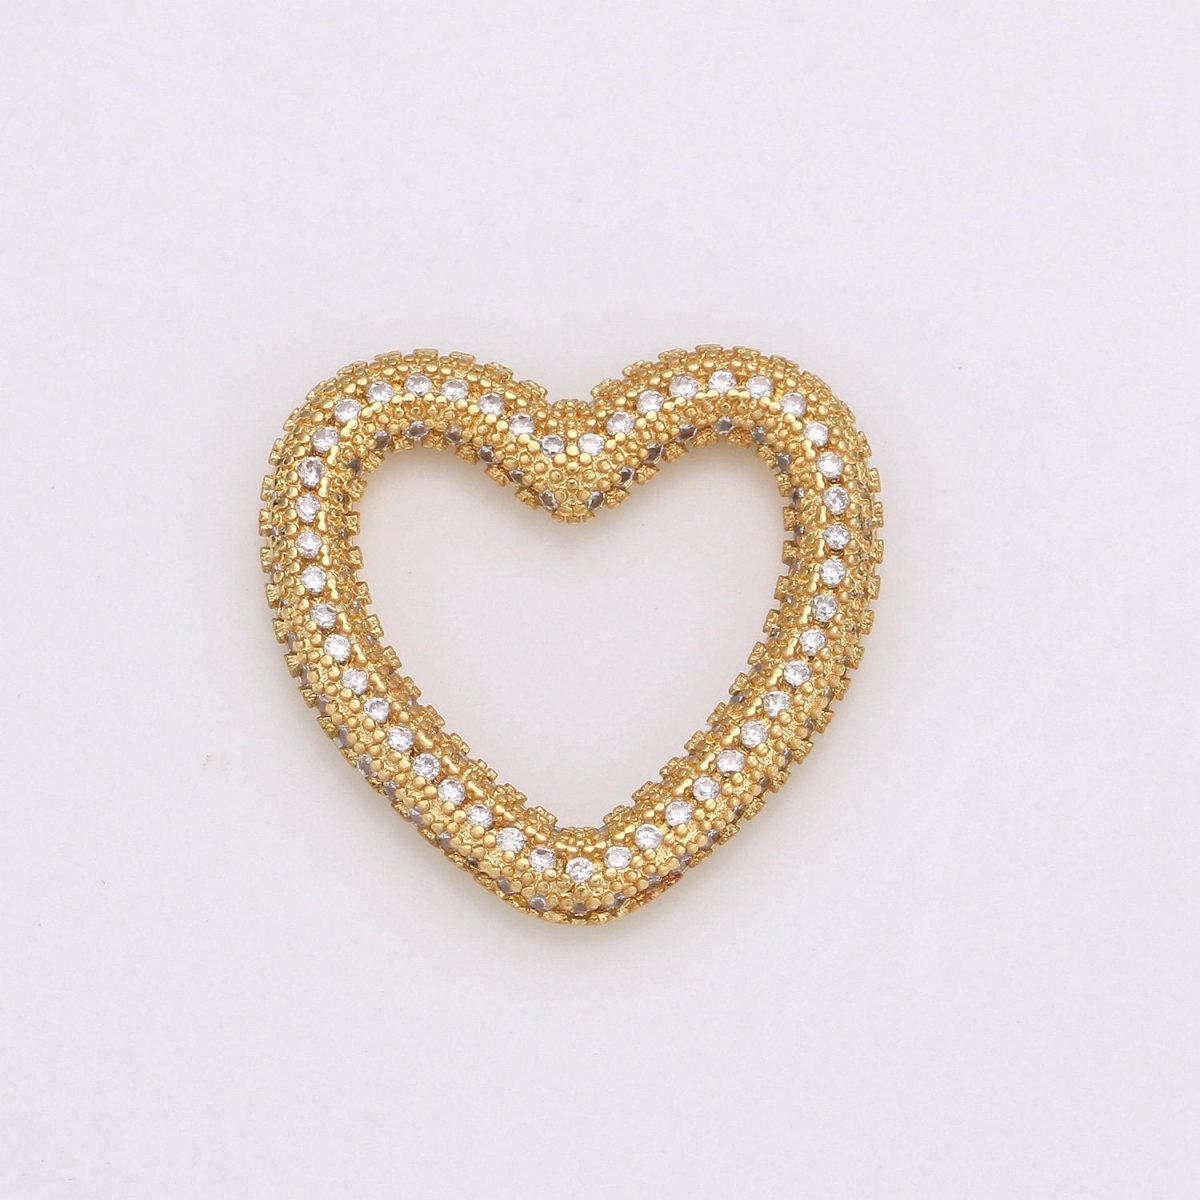 Dainty Heart Charm in Gold Filled - White Gold Filled Love Jewelry Micro Pave Heart Pendant 25X23mm, K-591 K-592 - DLUXCA